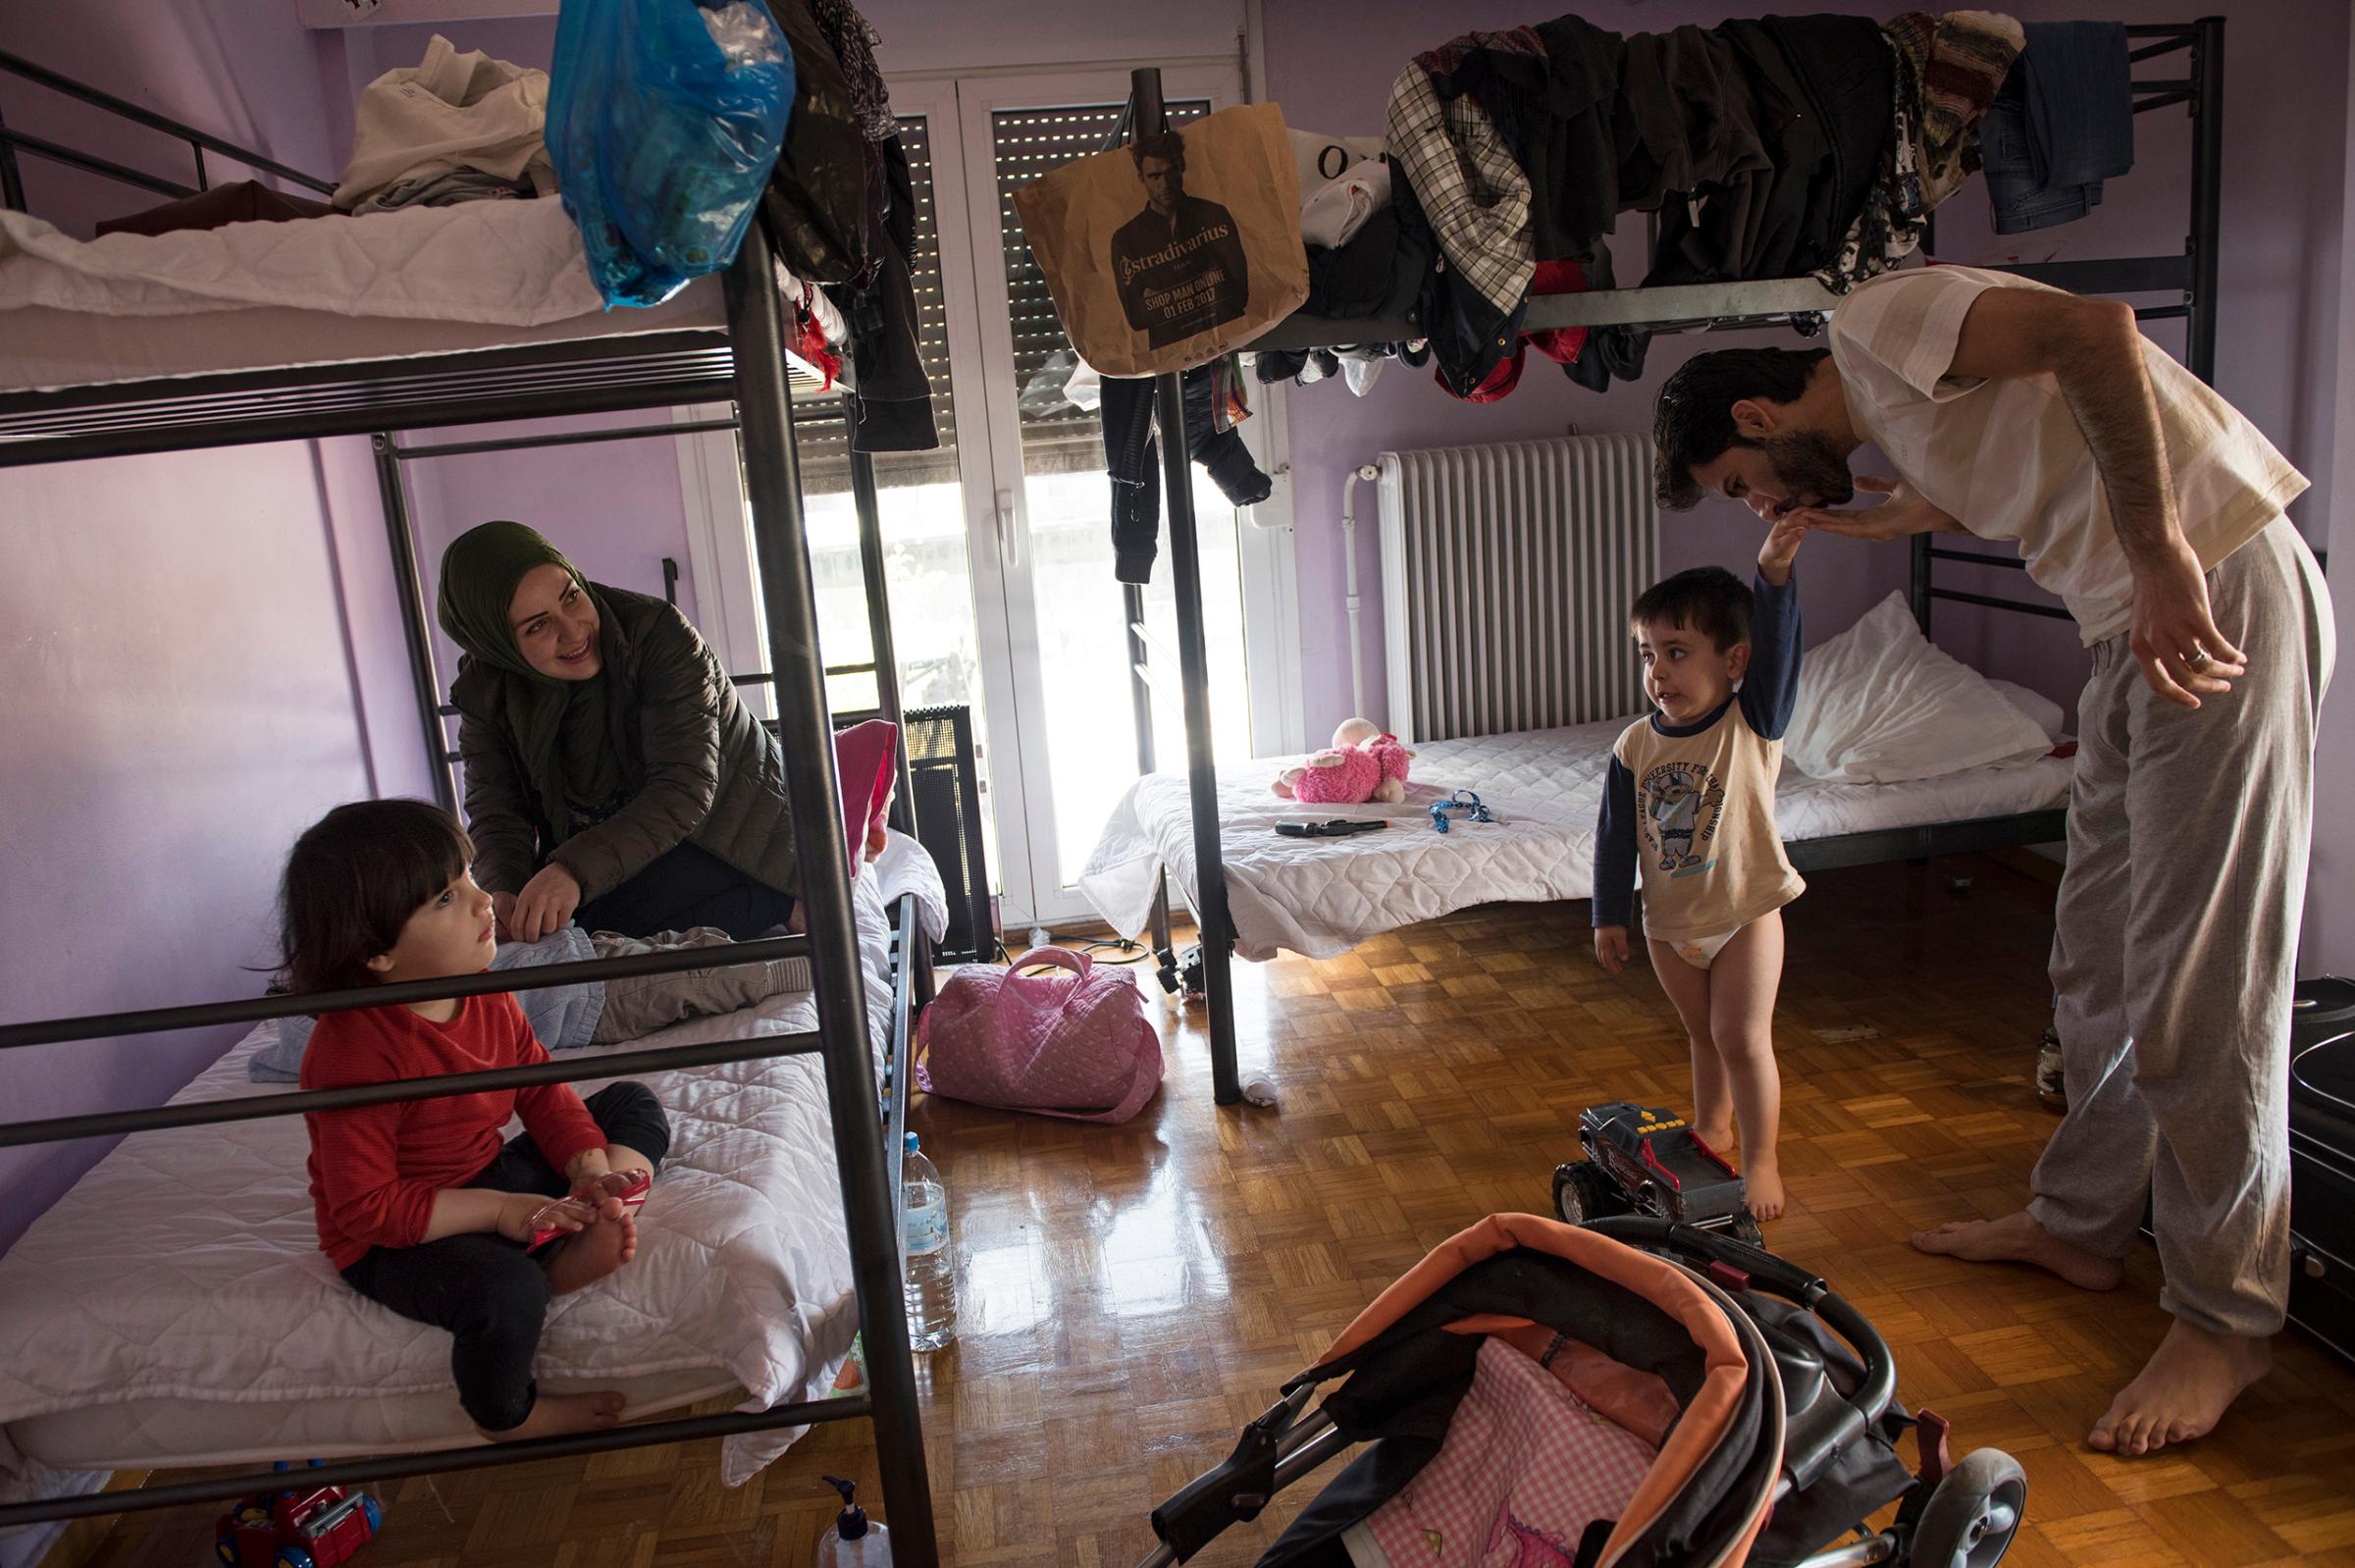 Syrian refugee, Taima, prepares to take her 6 month old daughter, Heln, for a visit to the Acropolis, while her husband, Muhannad Abzali, 28, jokes around with their other child, Wael, 3, at the temporary apartment they are staying at in Athens, Greece, March 31, 2017.